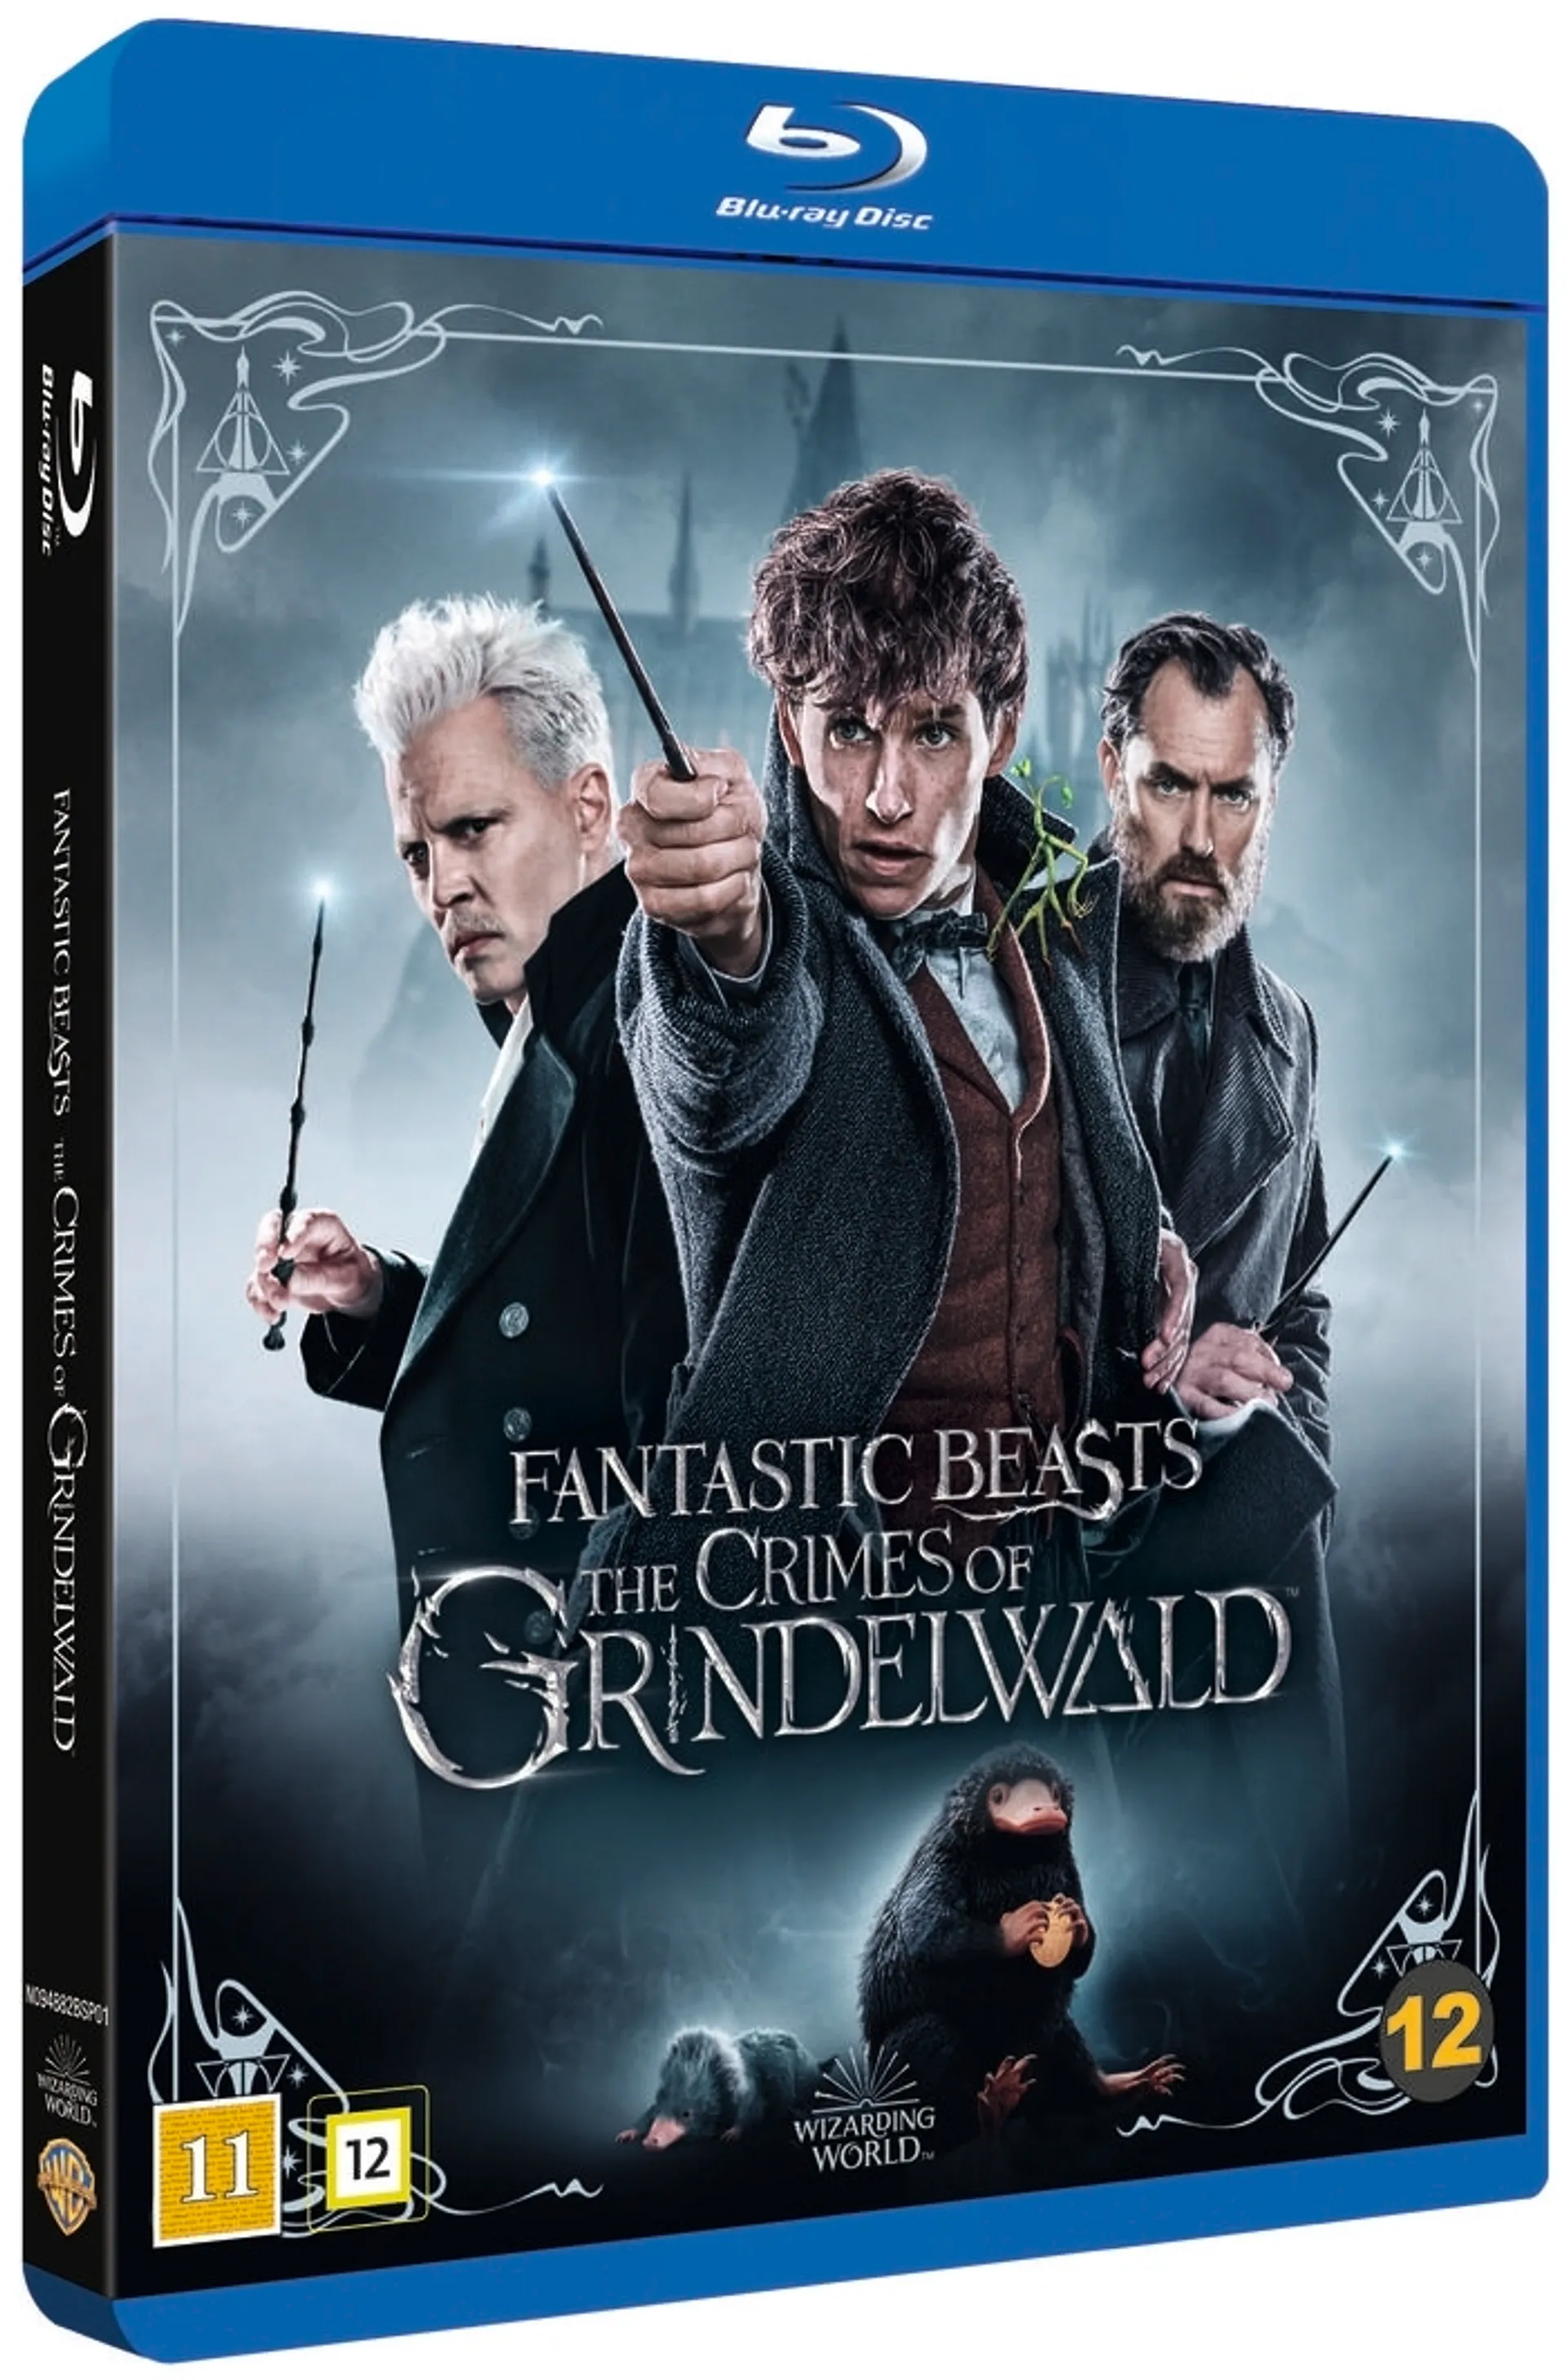 Fantastic Beasts - The Crimes of Grindelwald Blu-ray